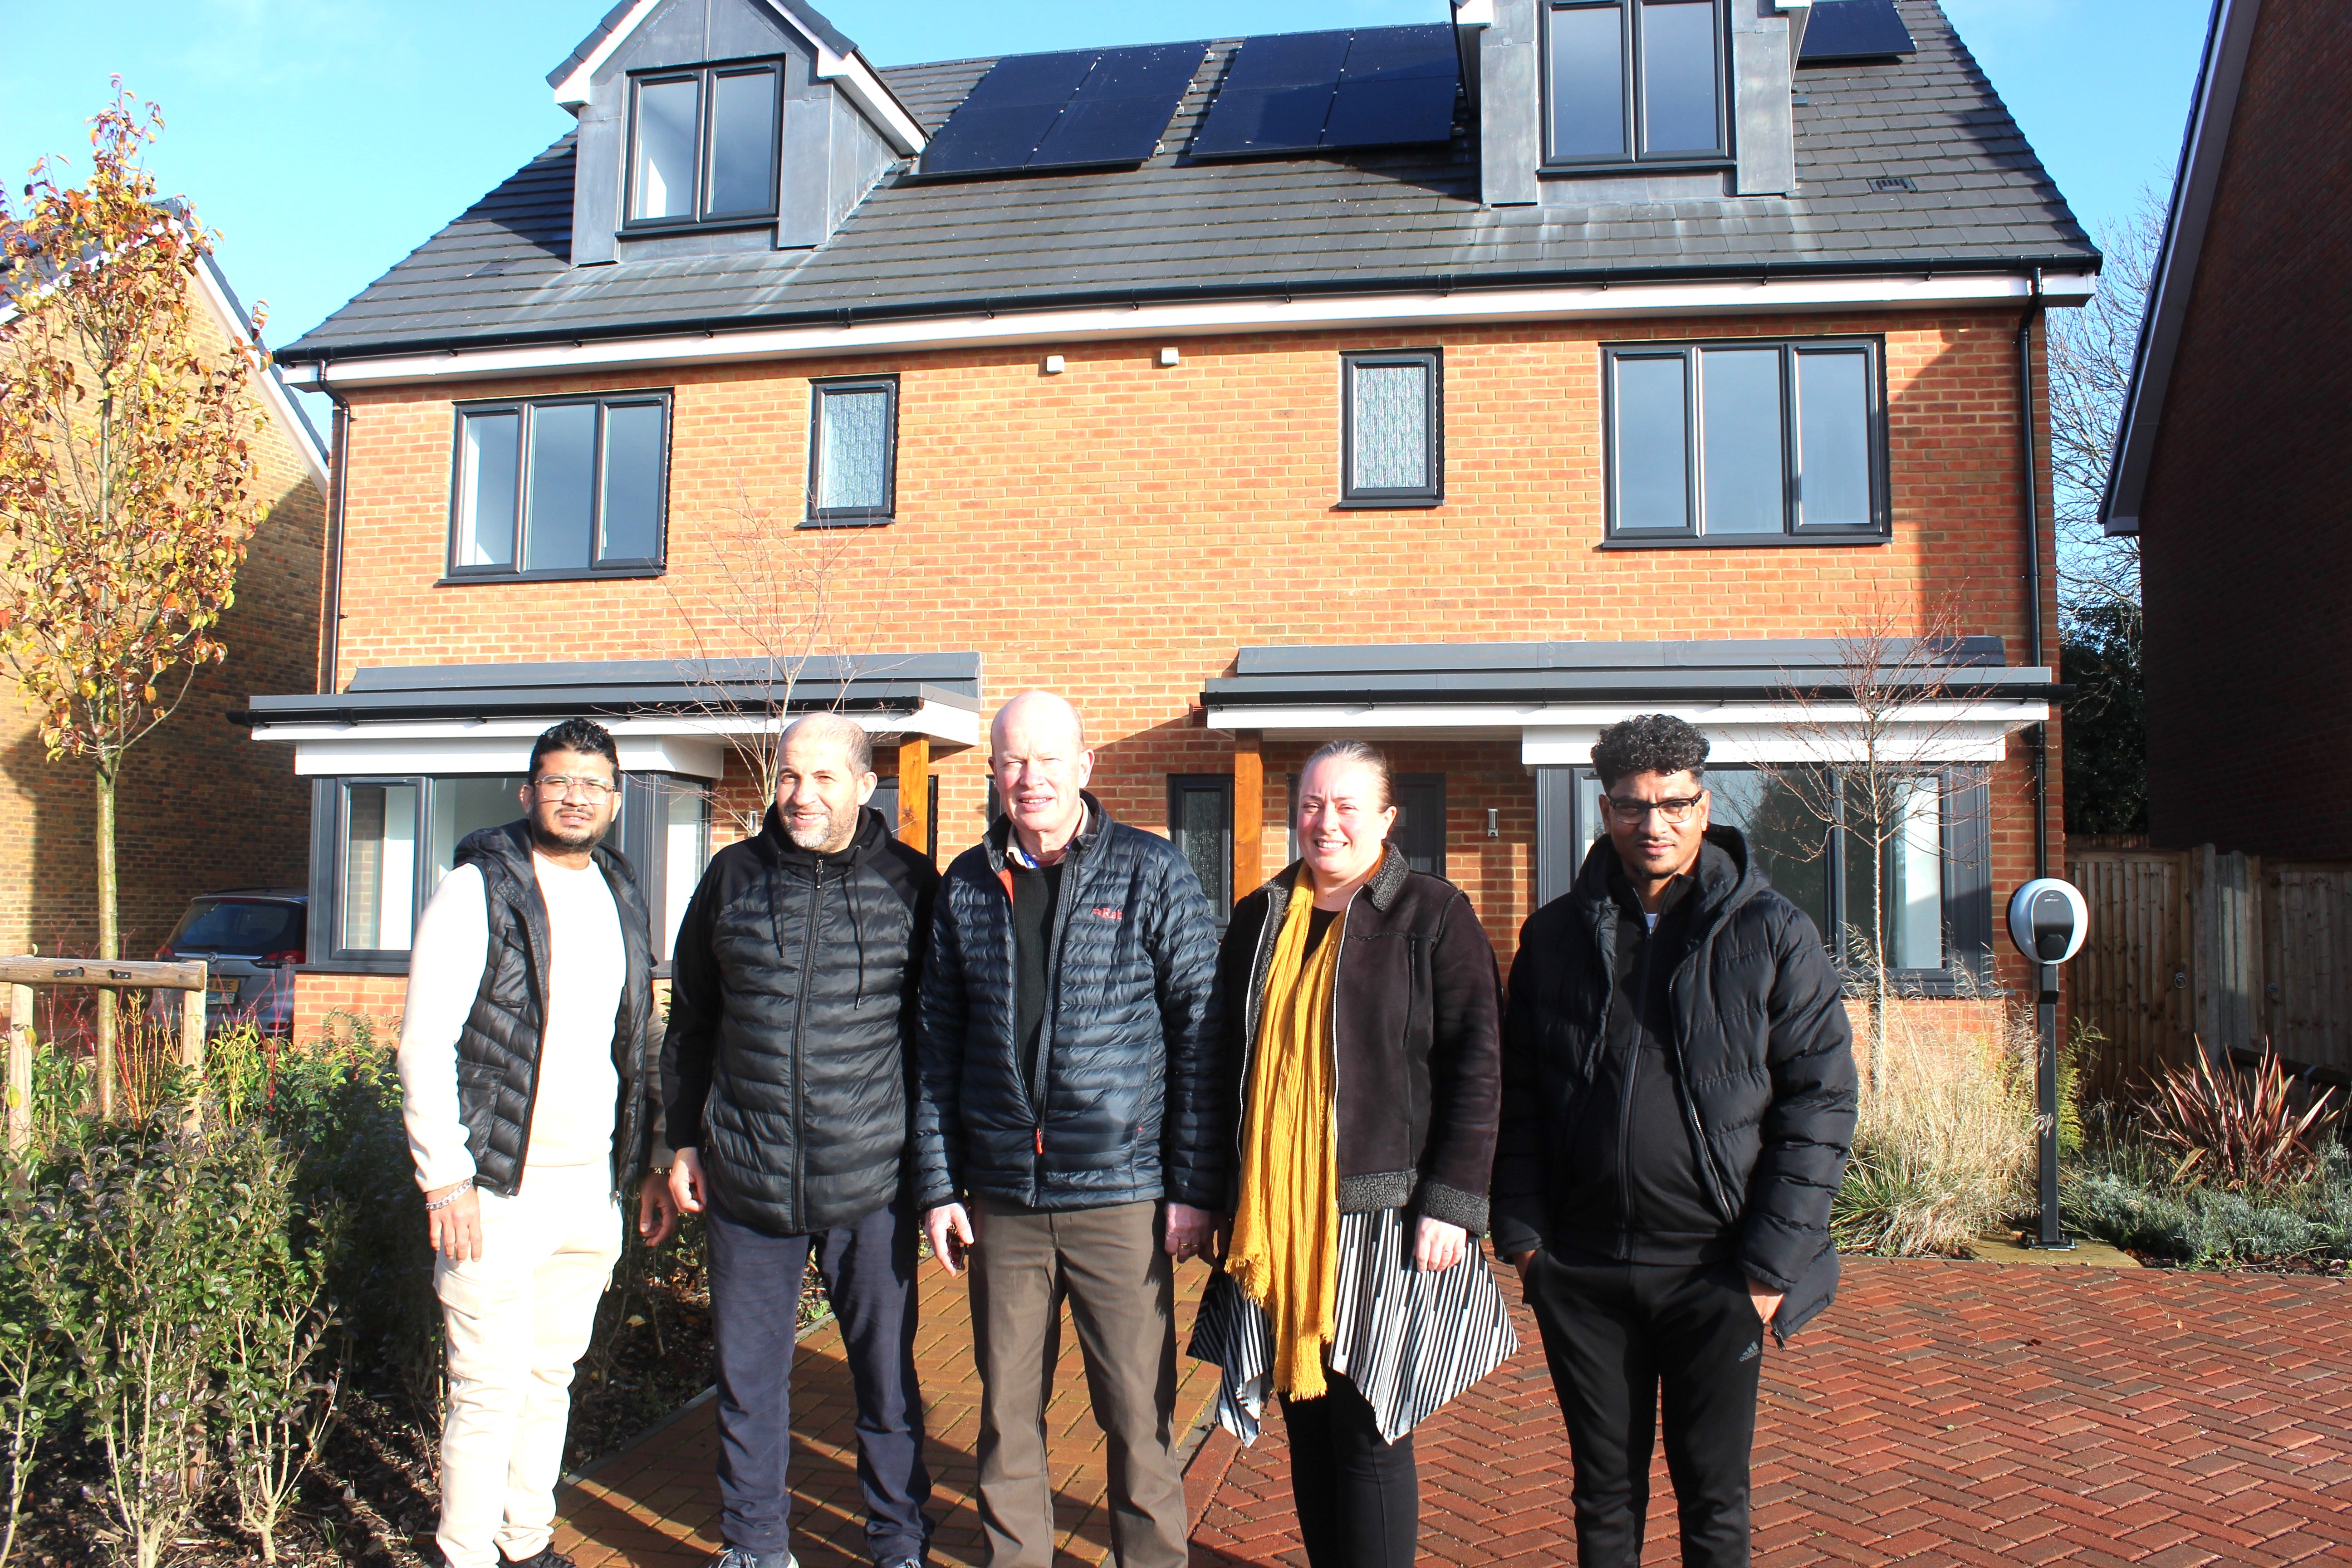 Cllr Jacqui Taylor (4th from left) and Cllr Paul De Kort (3rd from left) at the Viking Close development with some of the new tenants